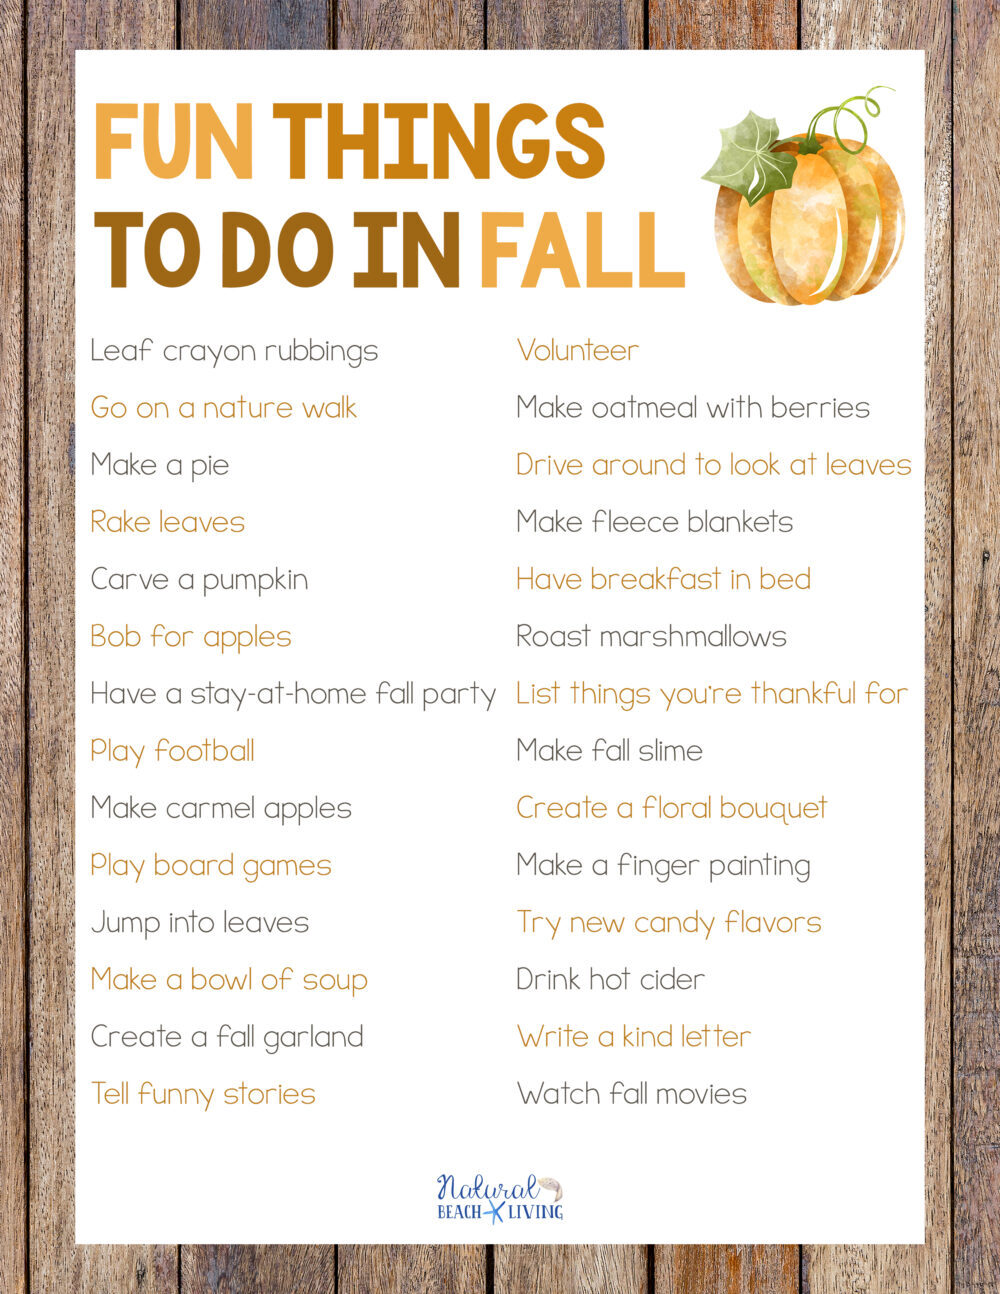 30+ Fun Things To Do In Fall for the Whole Family